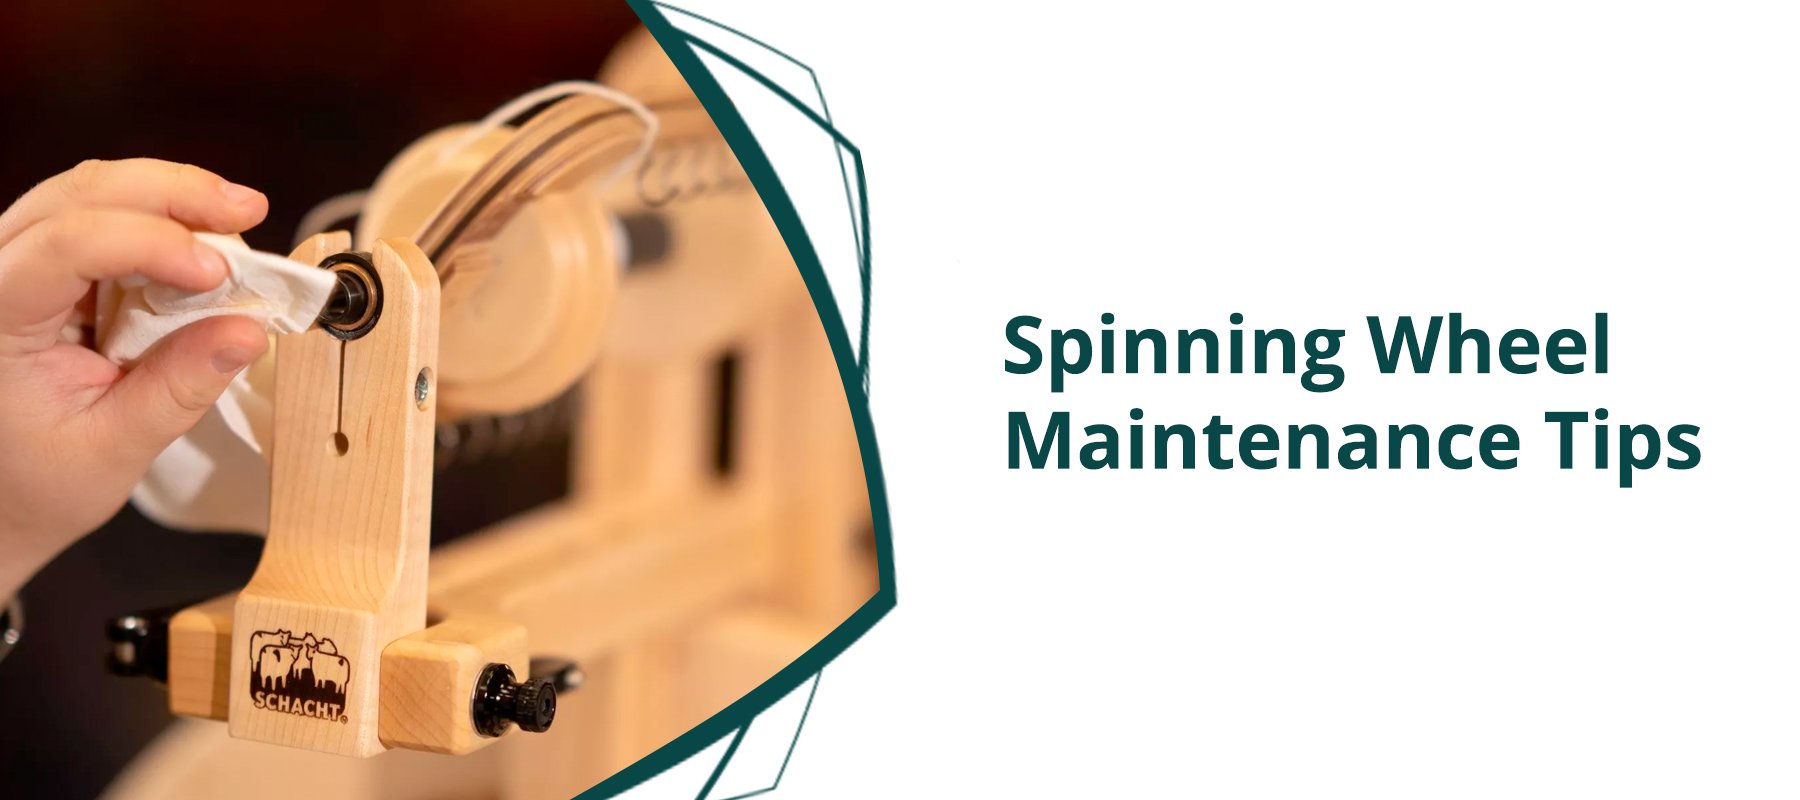 Spinning Wheel Maintenance Tips: How to Maintain Your Spinning Wheel for Longevity